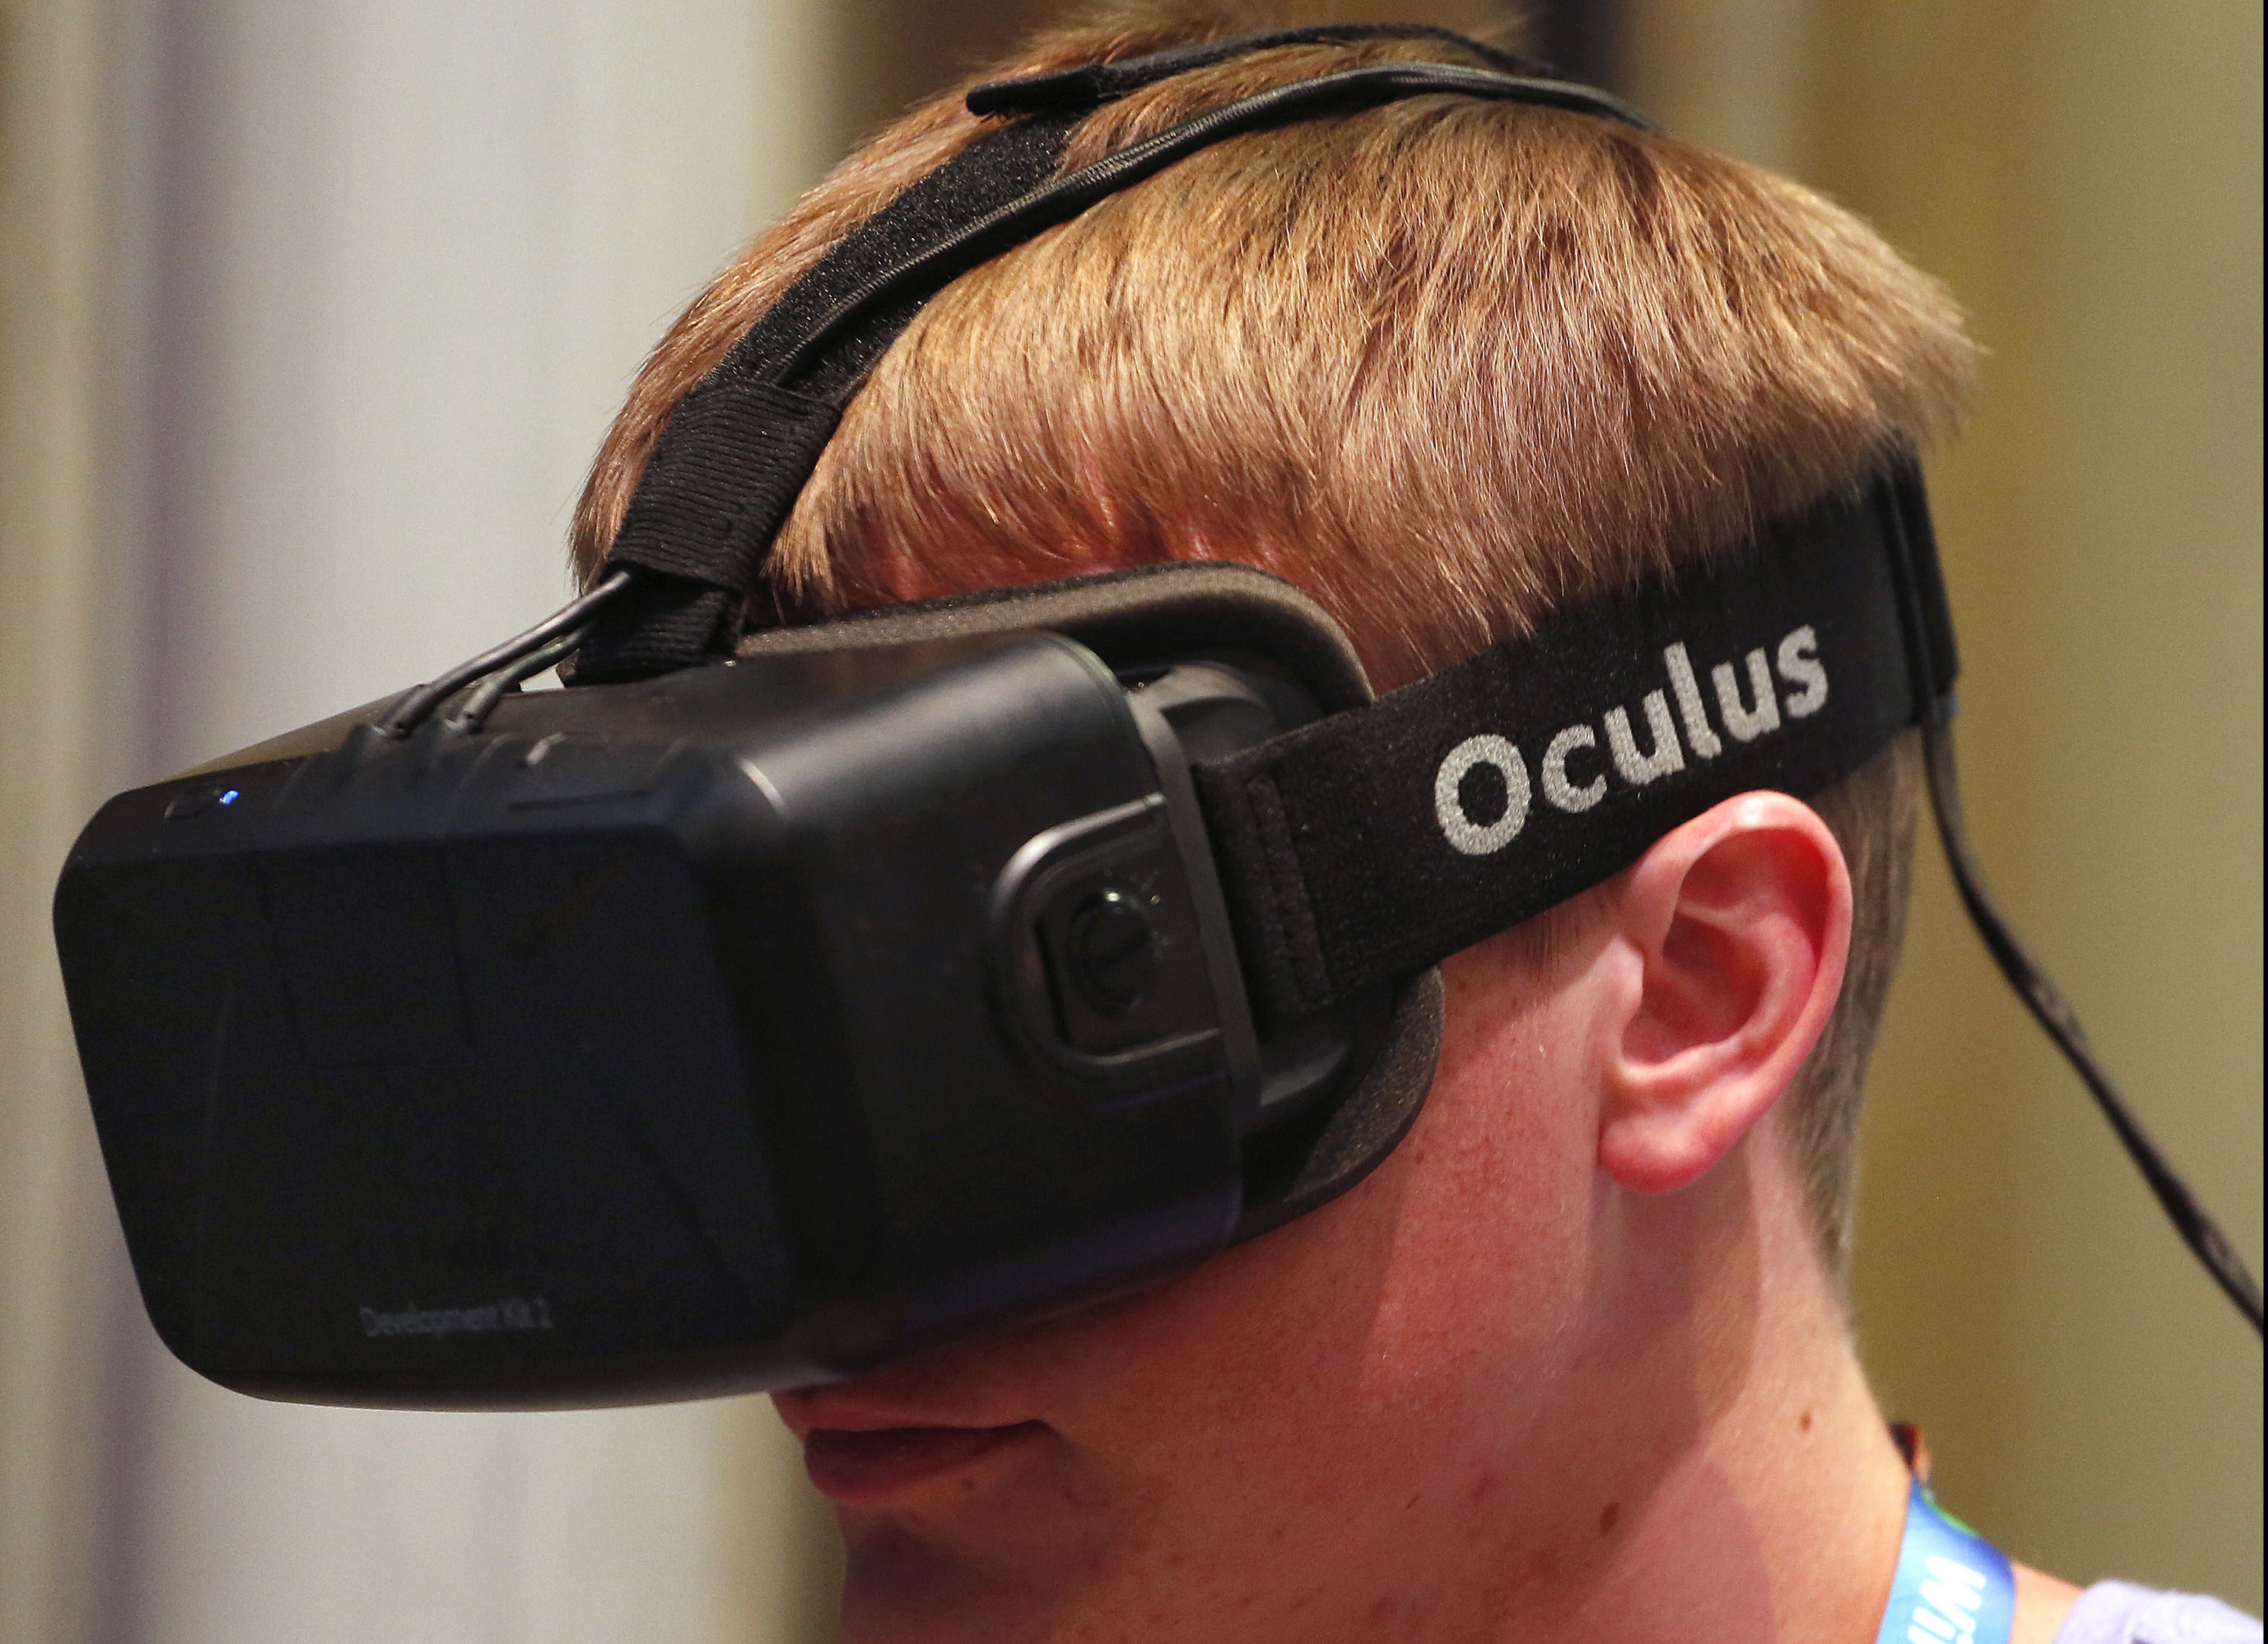 oculus vr headset for pc